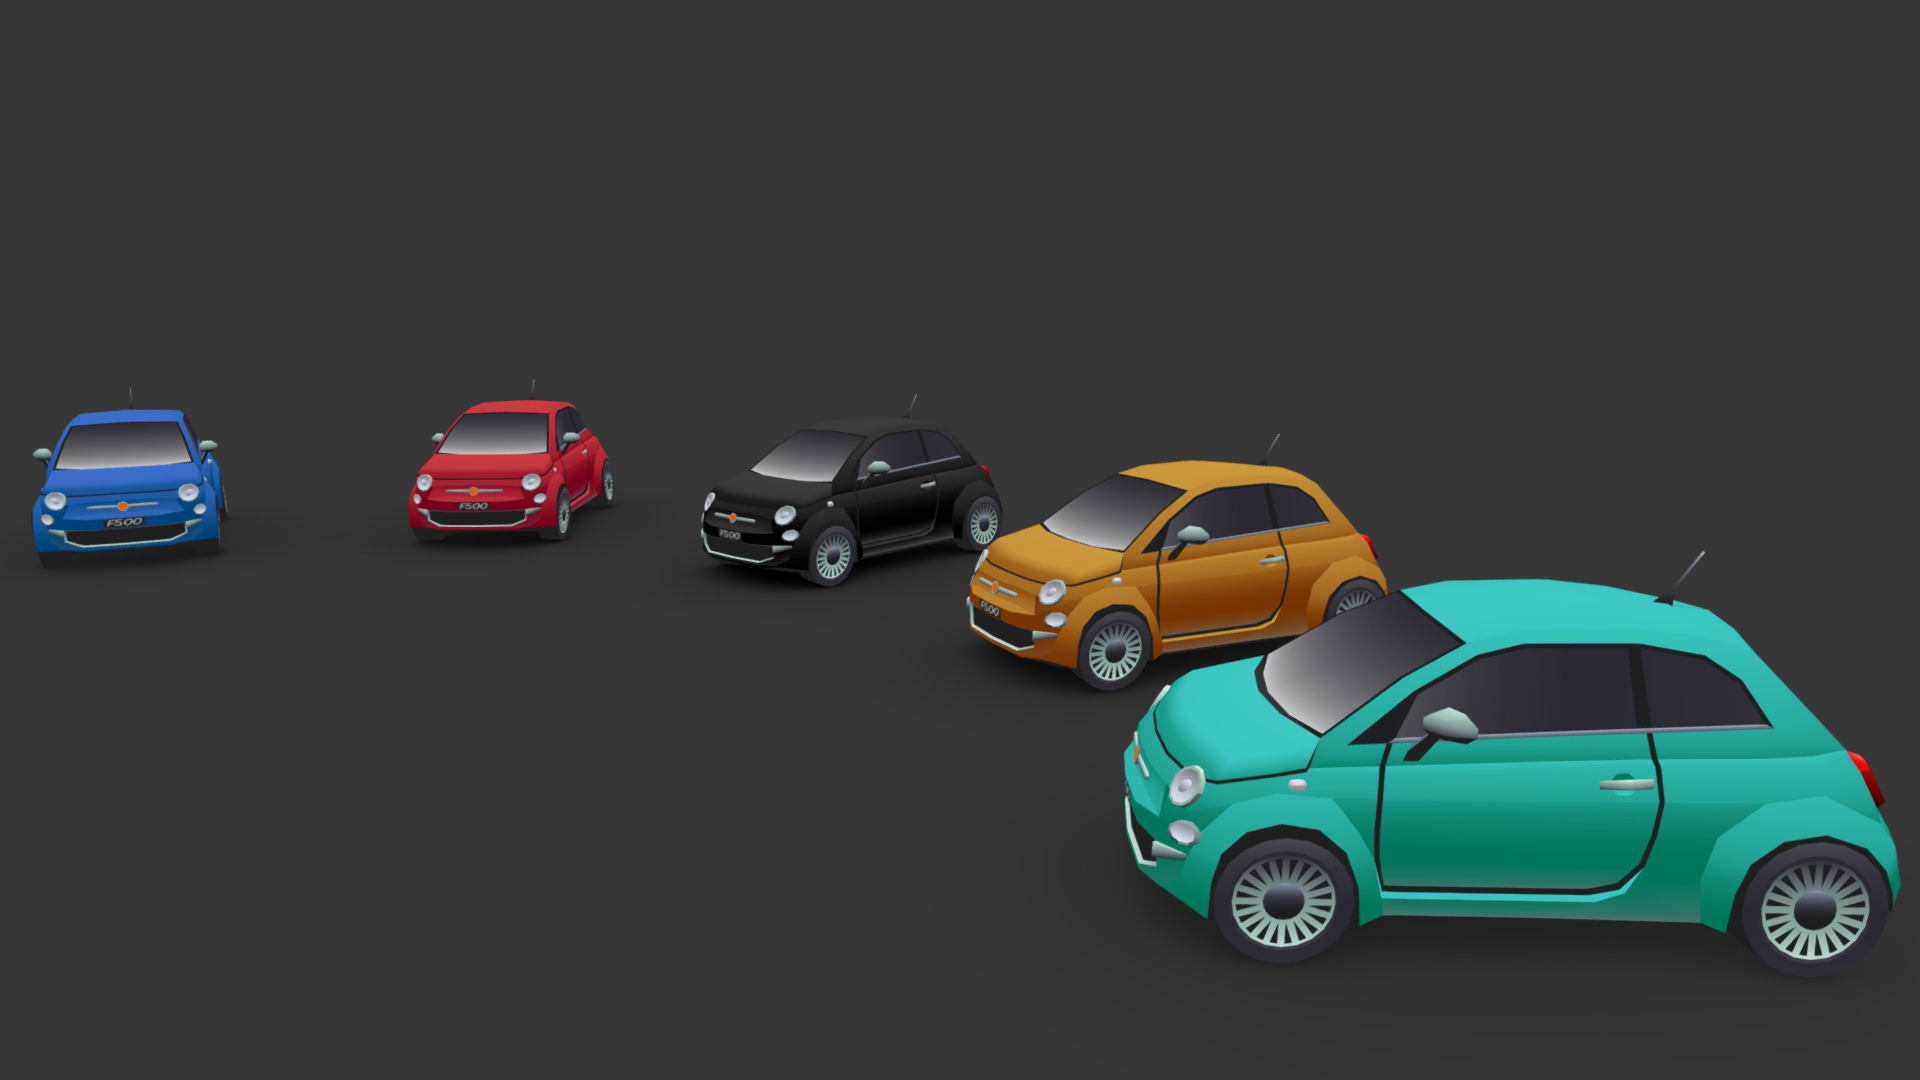 3D model Fiat Cinquecento - This is a 3D model of the Fiat Cinquecento. The 3D model is about a group of toy cars.